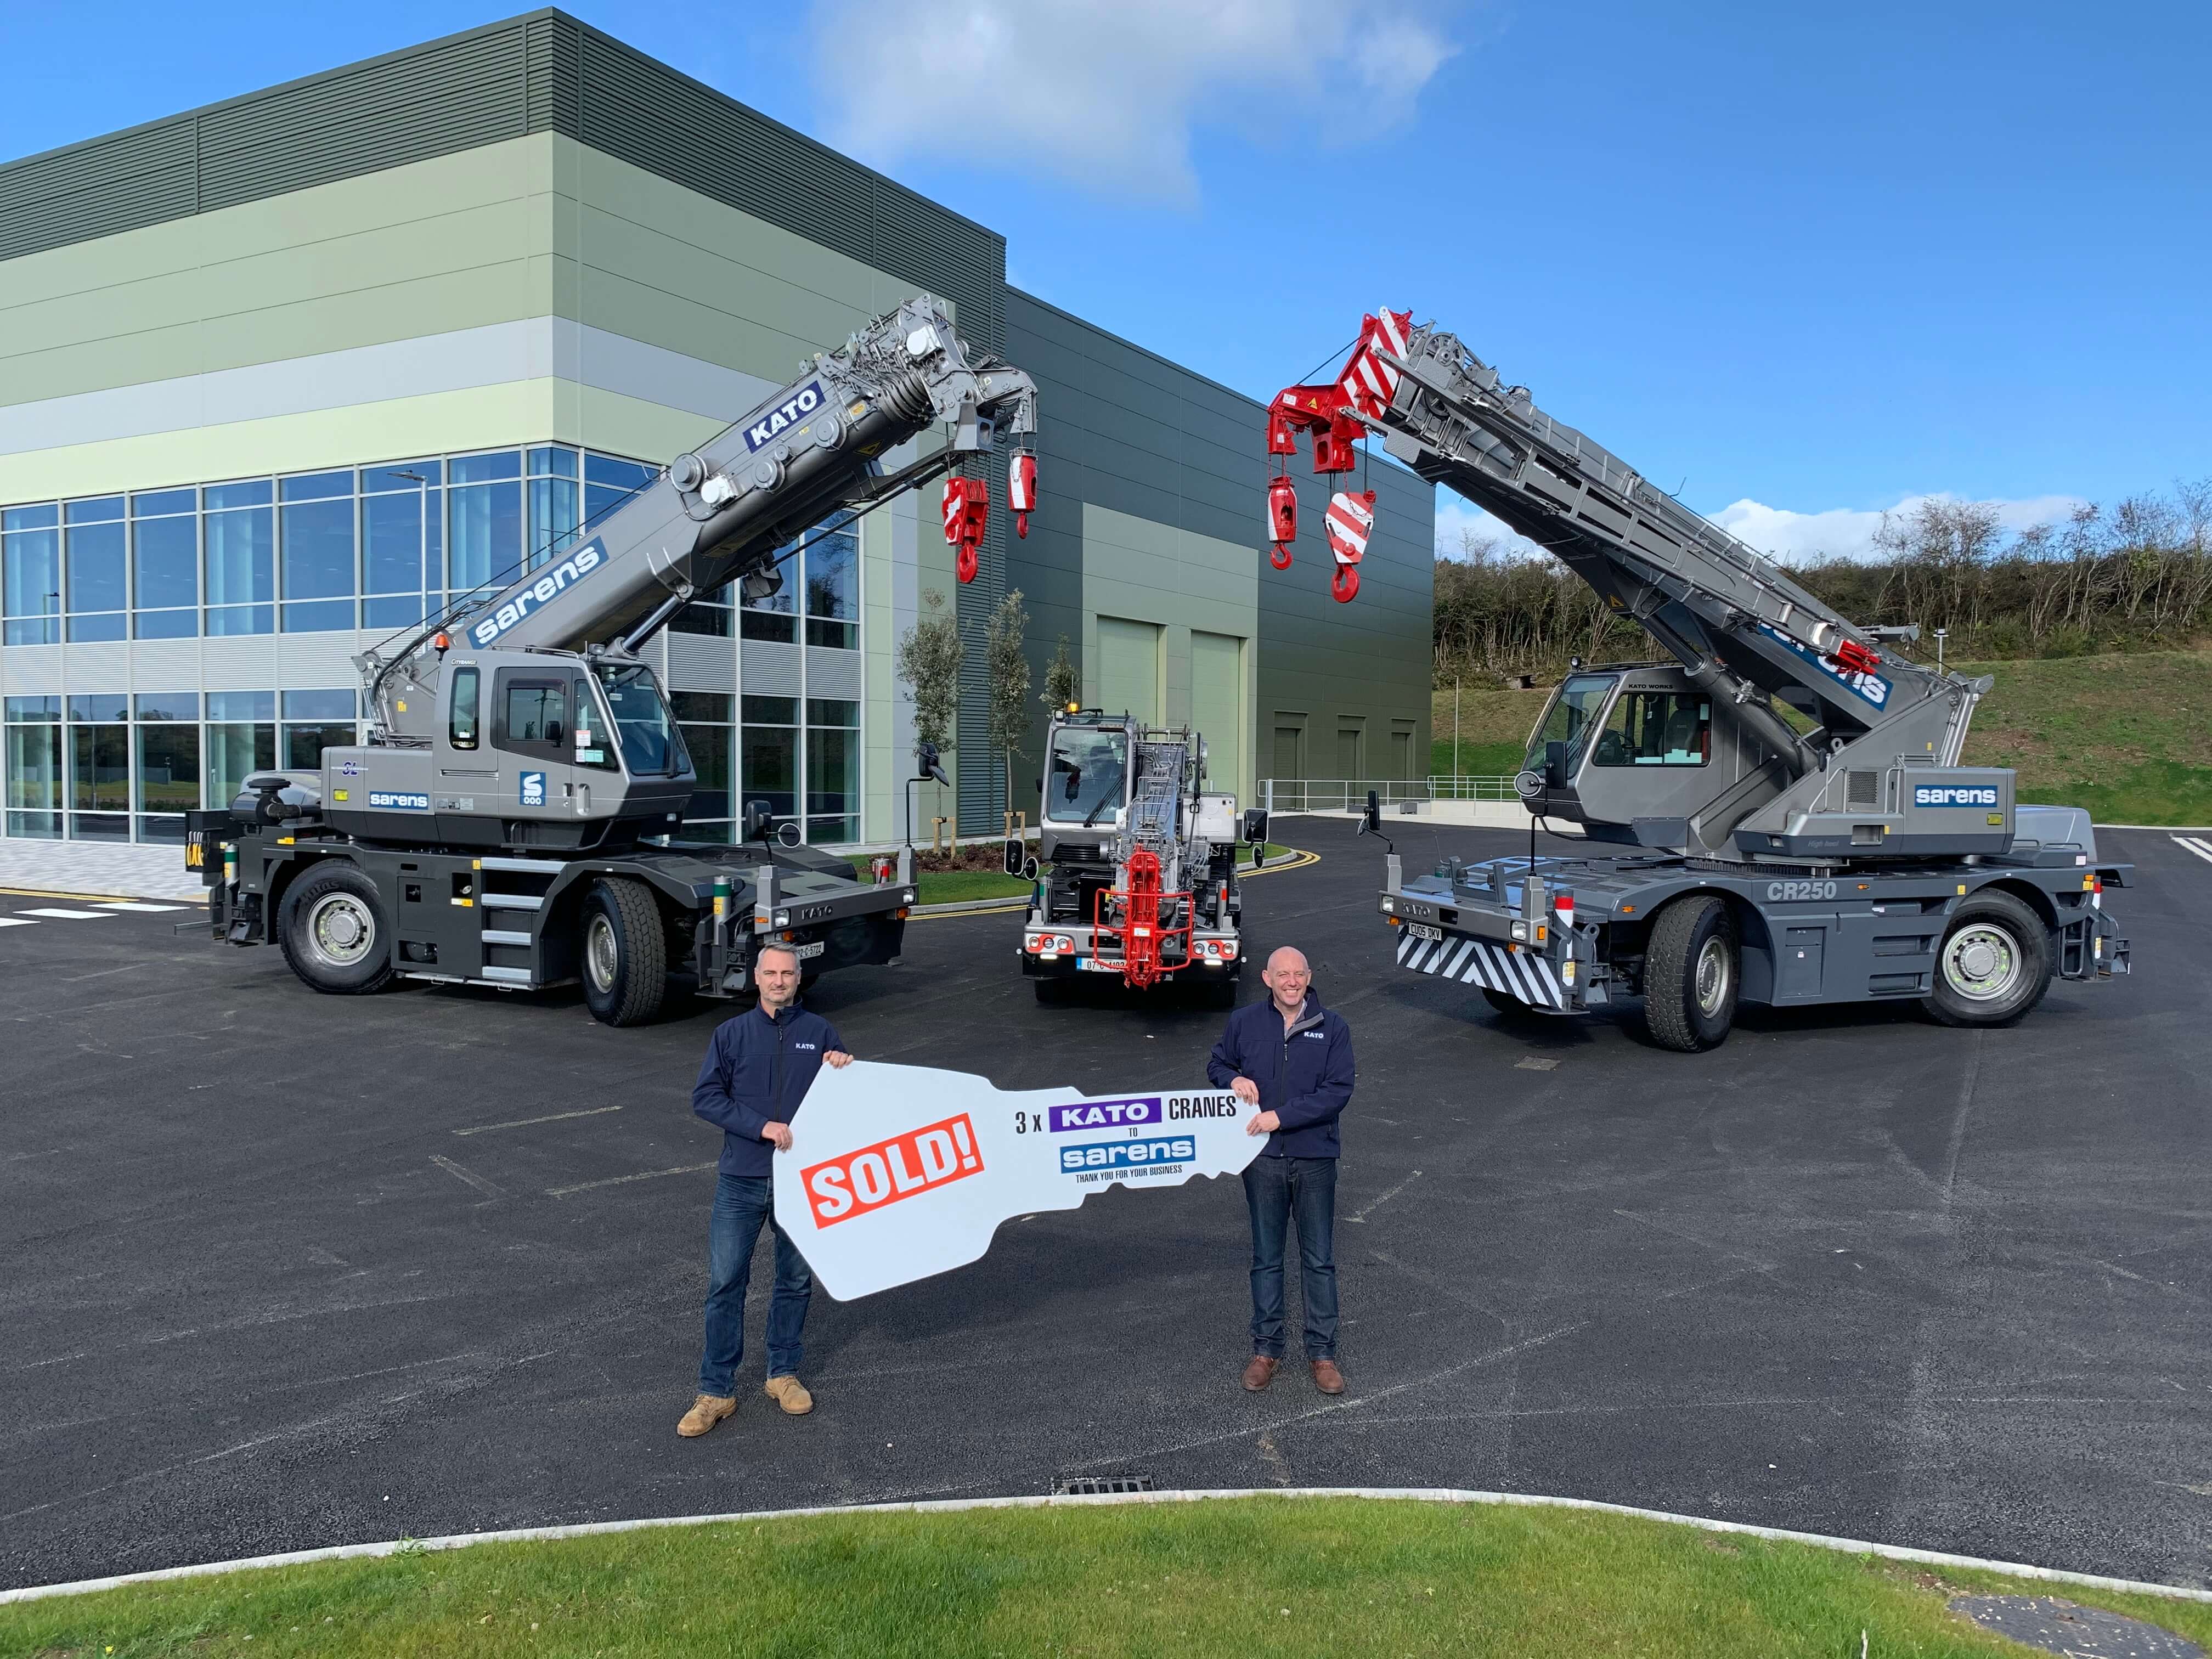 Ivan Bolster (L) and Colin Cleary of Kato hand over the new cranes virtually at its facility in Cork, Ireland 